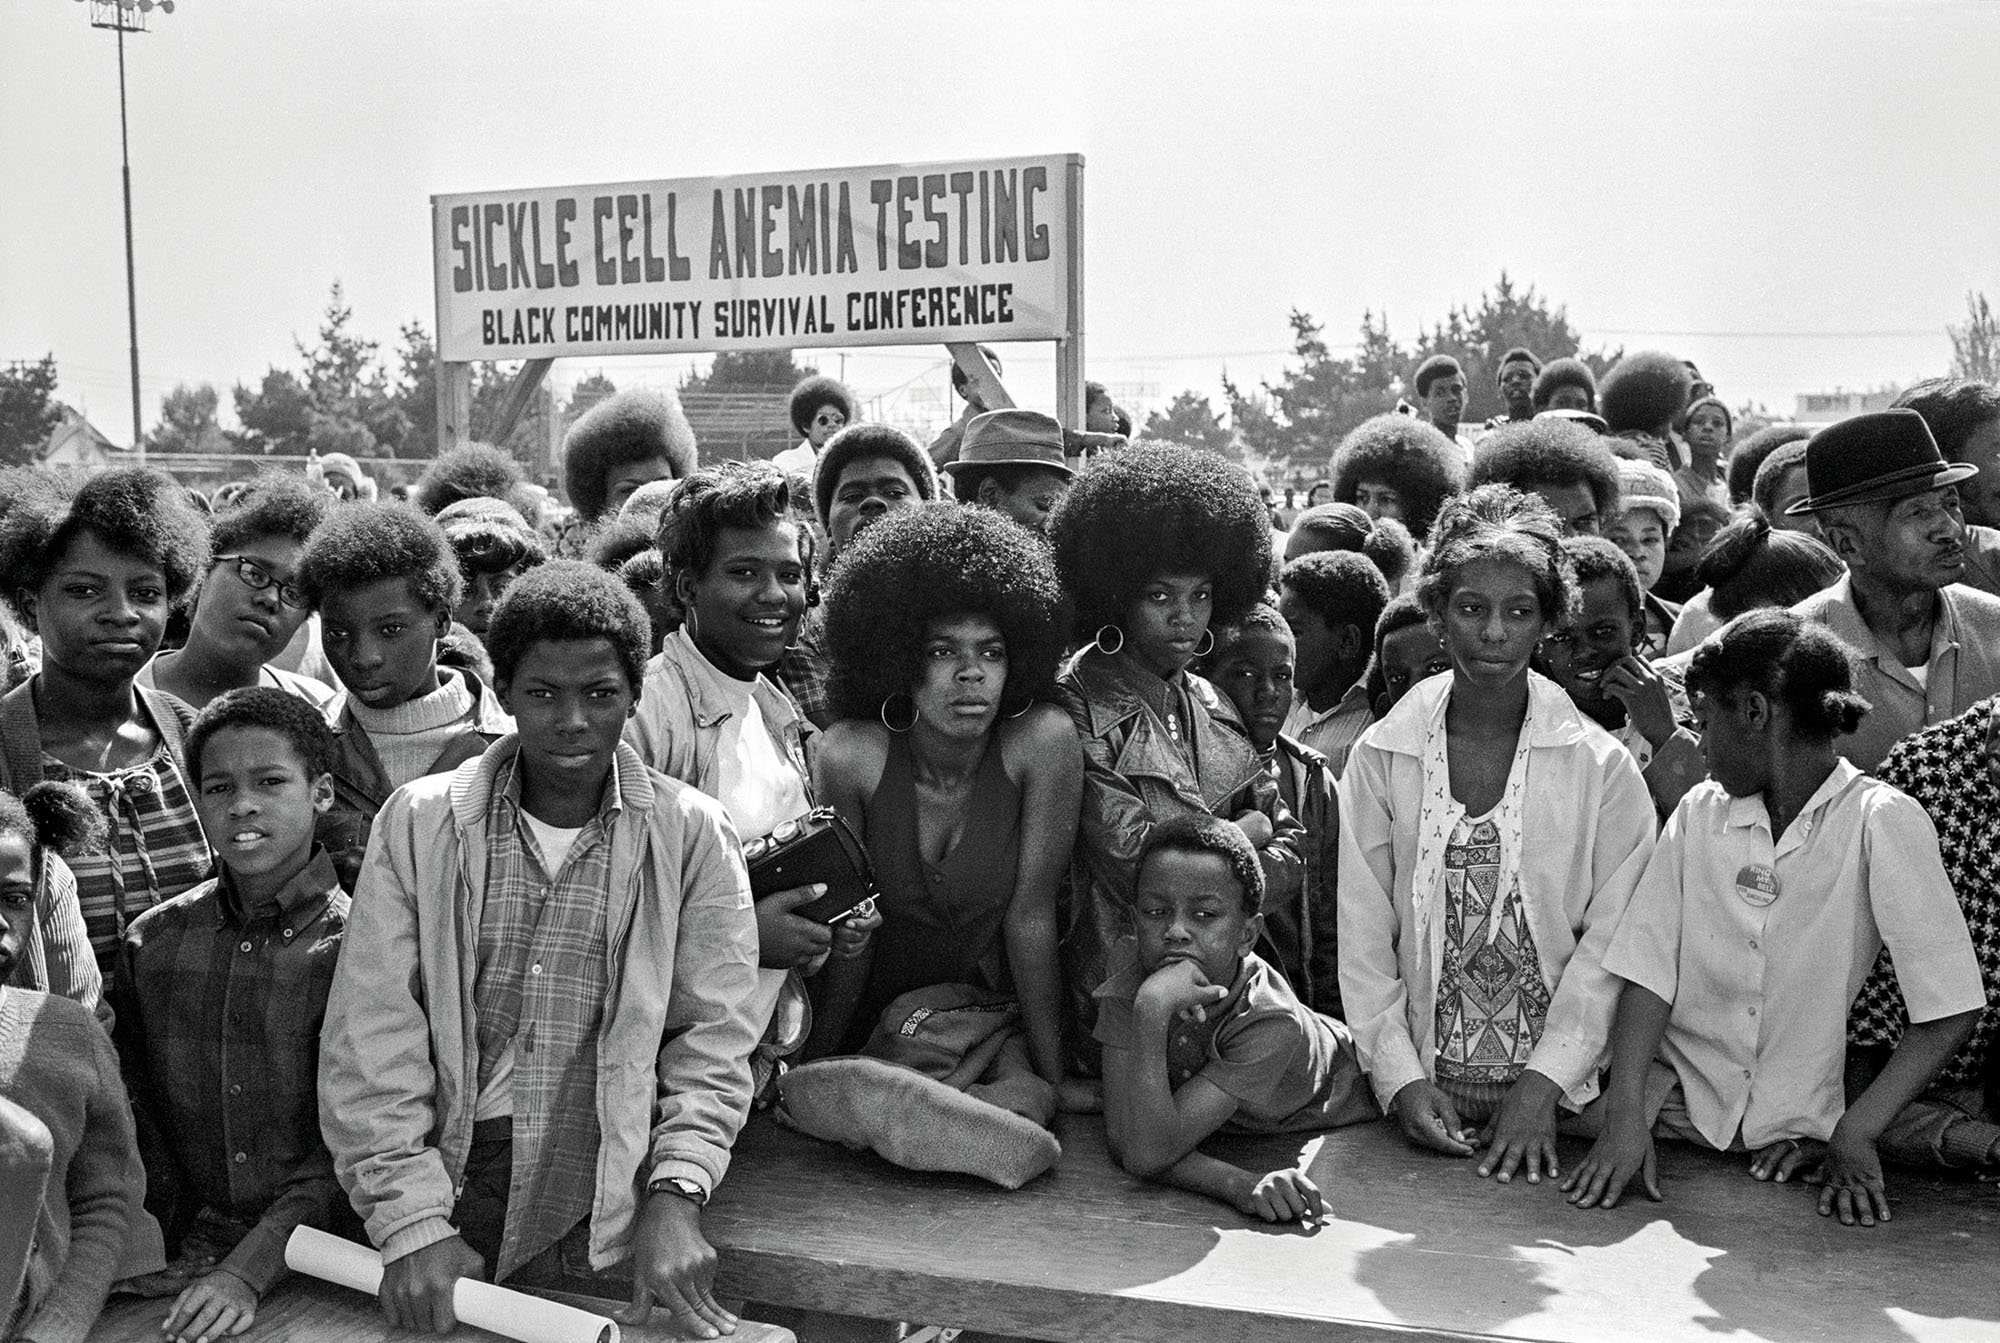 March 31, 1972 - Oakland, California: Testing for Sickle Cell Anemia at Community Survival Conference.